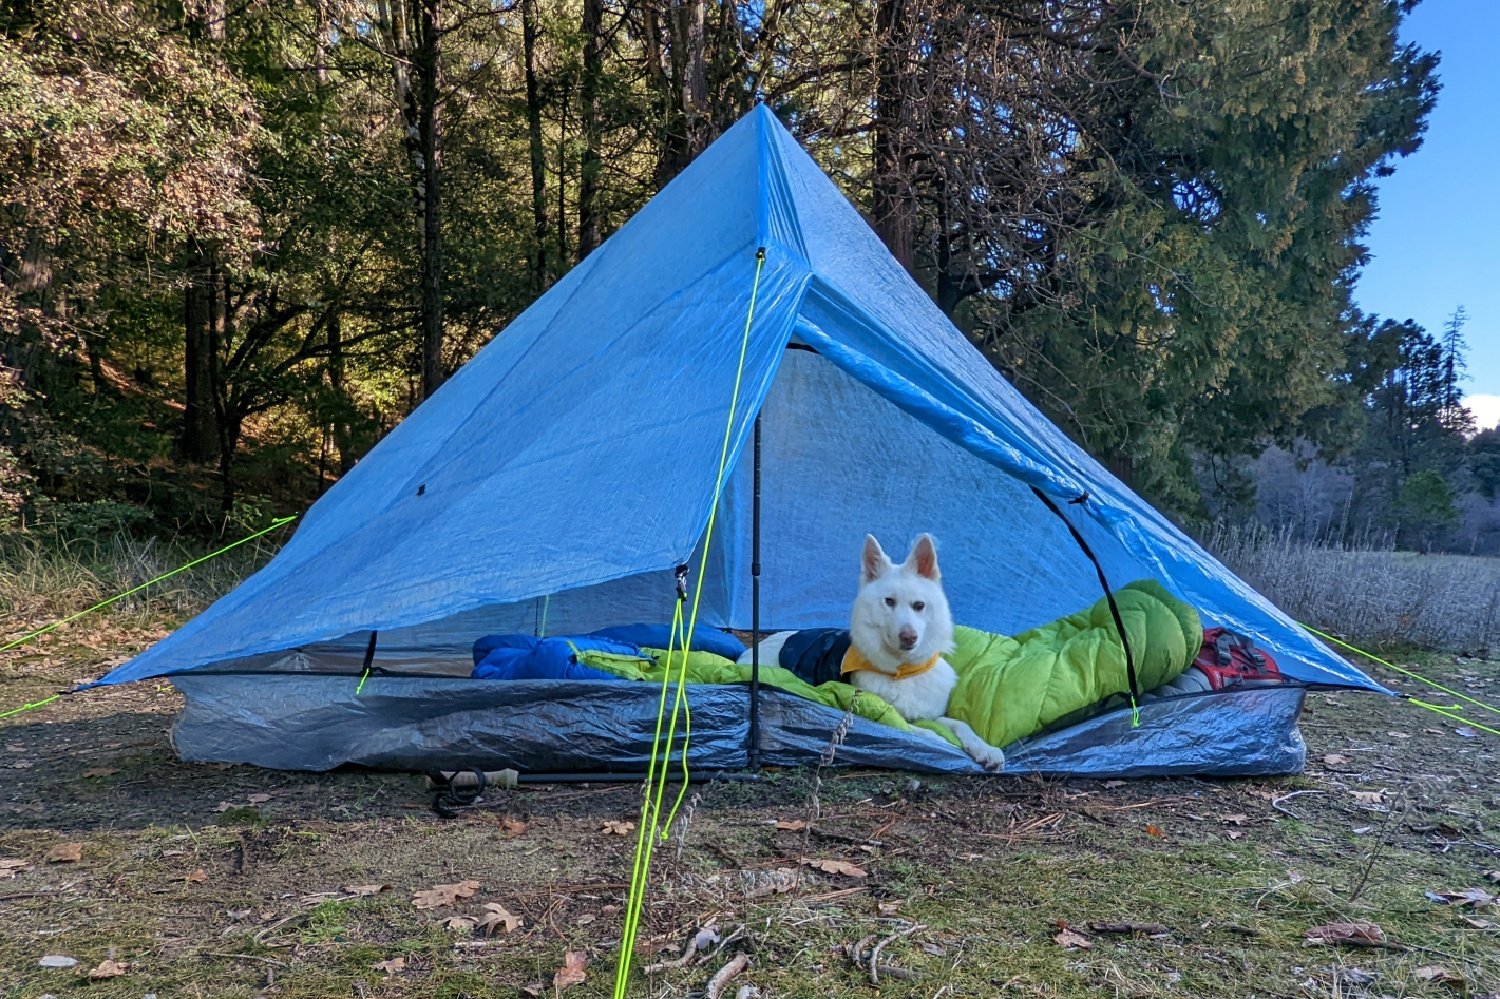 A dog sitting in the Zpacks Plex Solo tent with the door open